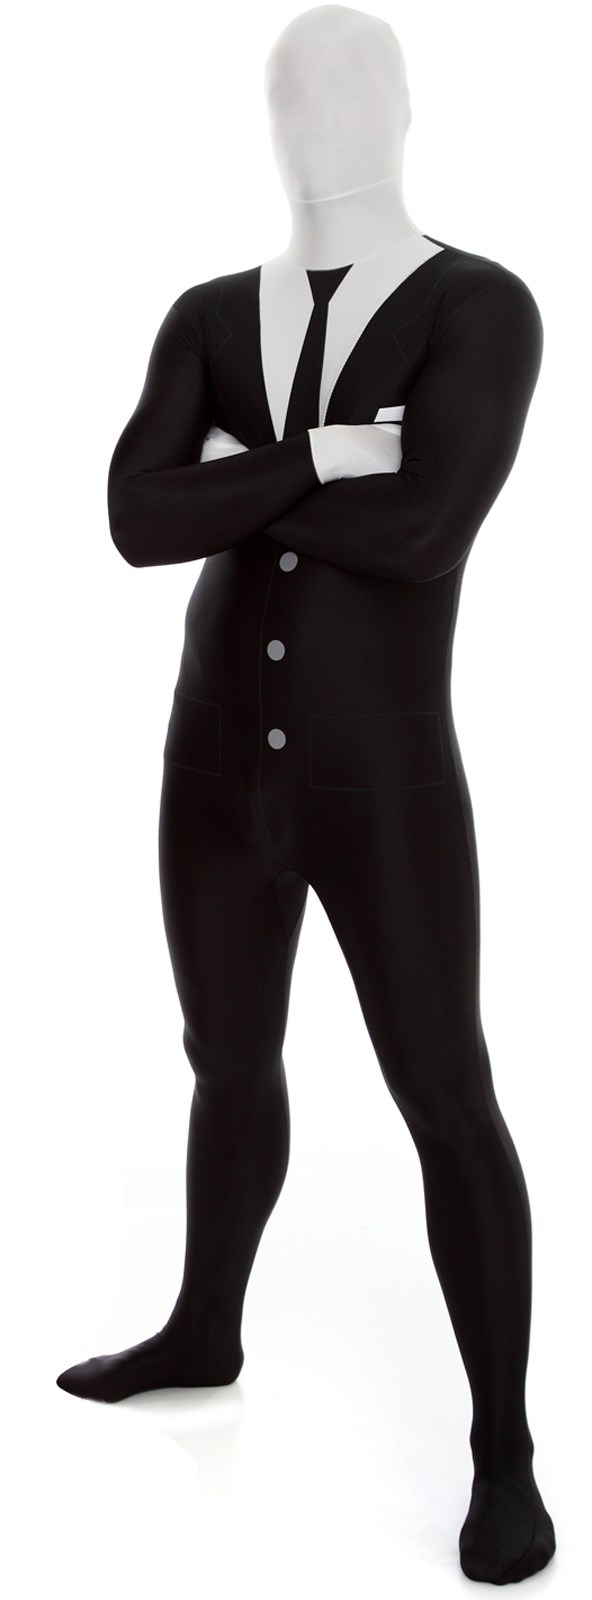 Invisible Man Adult Morphsuit